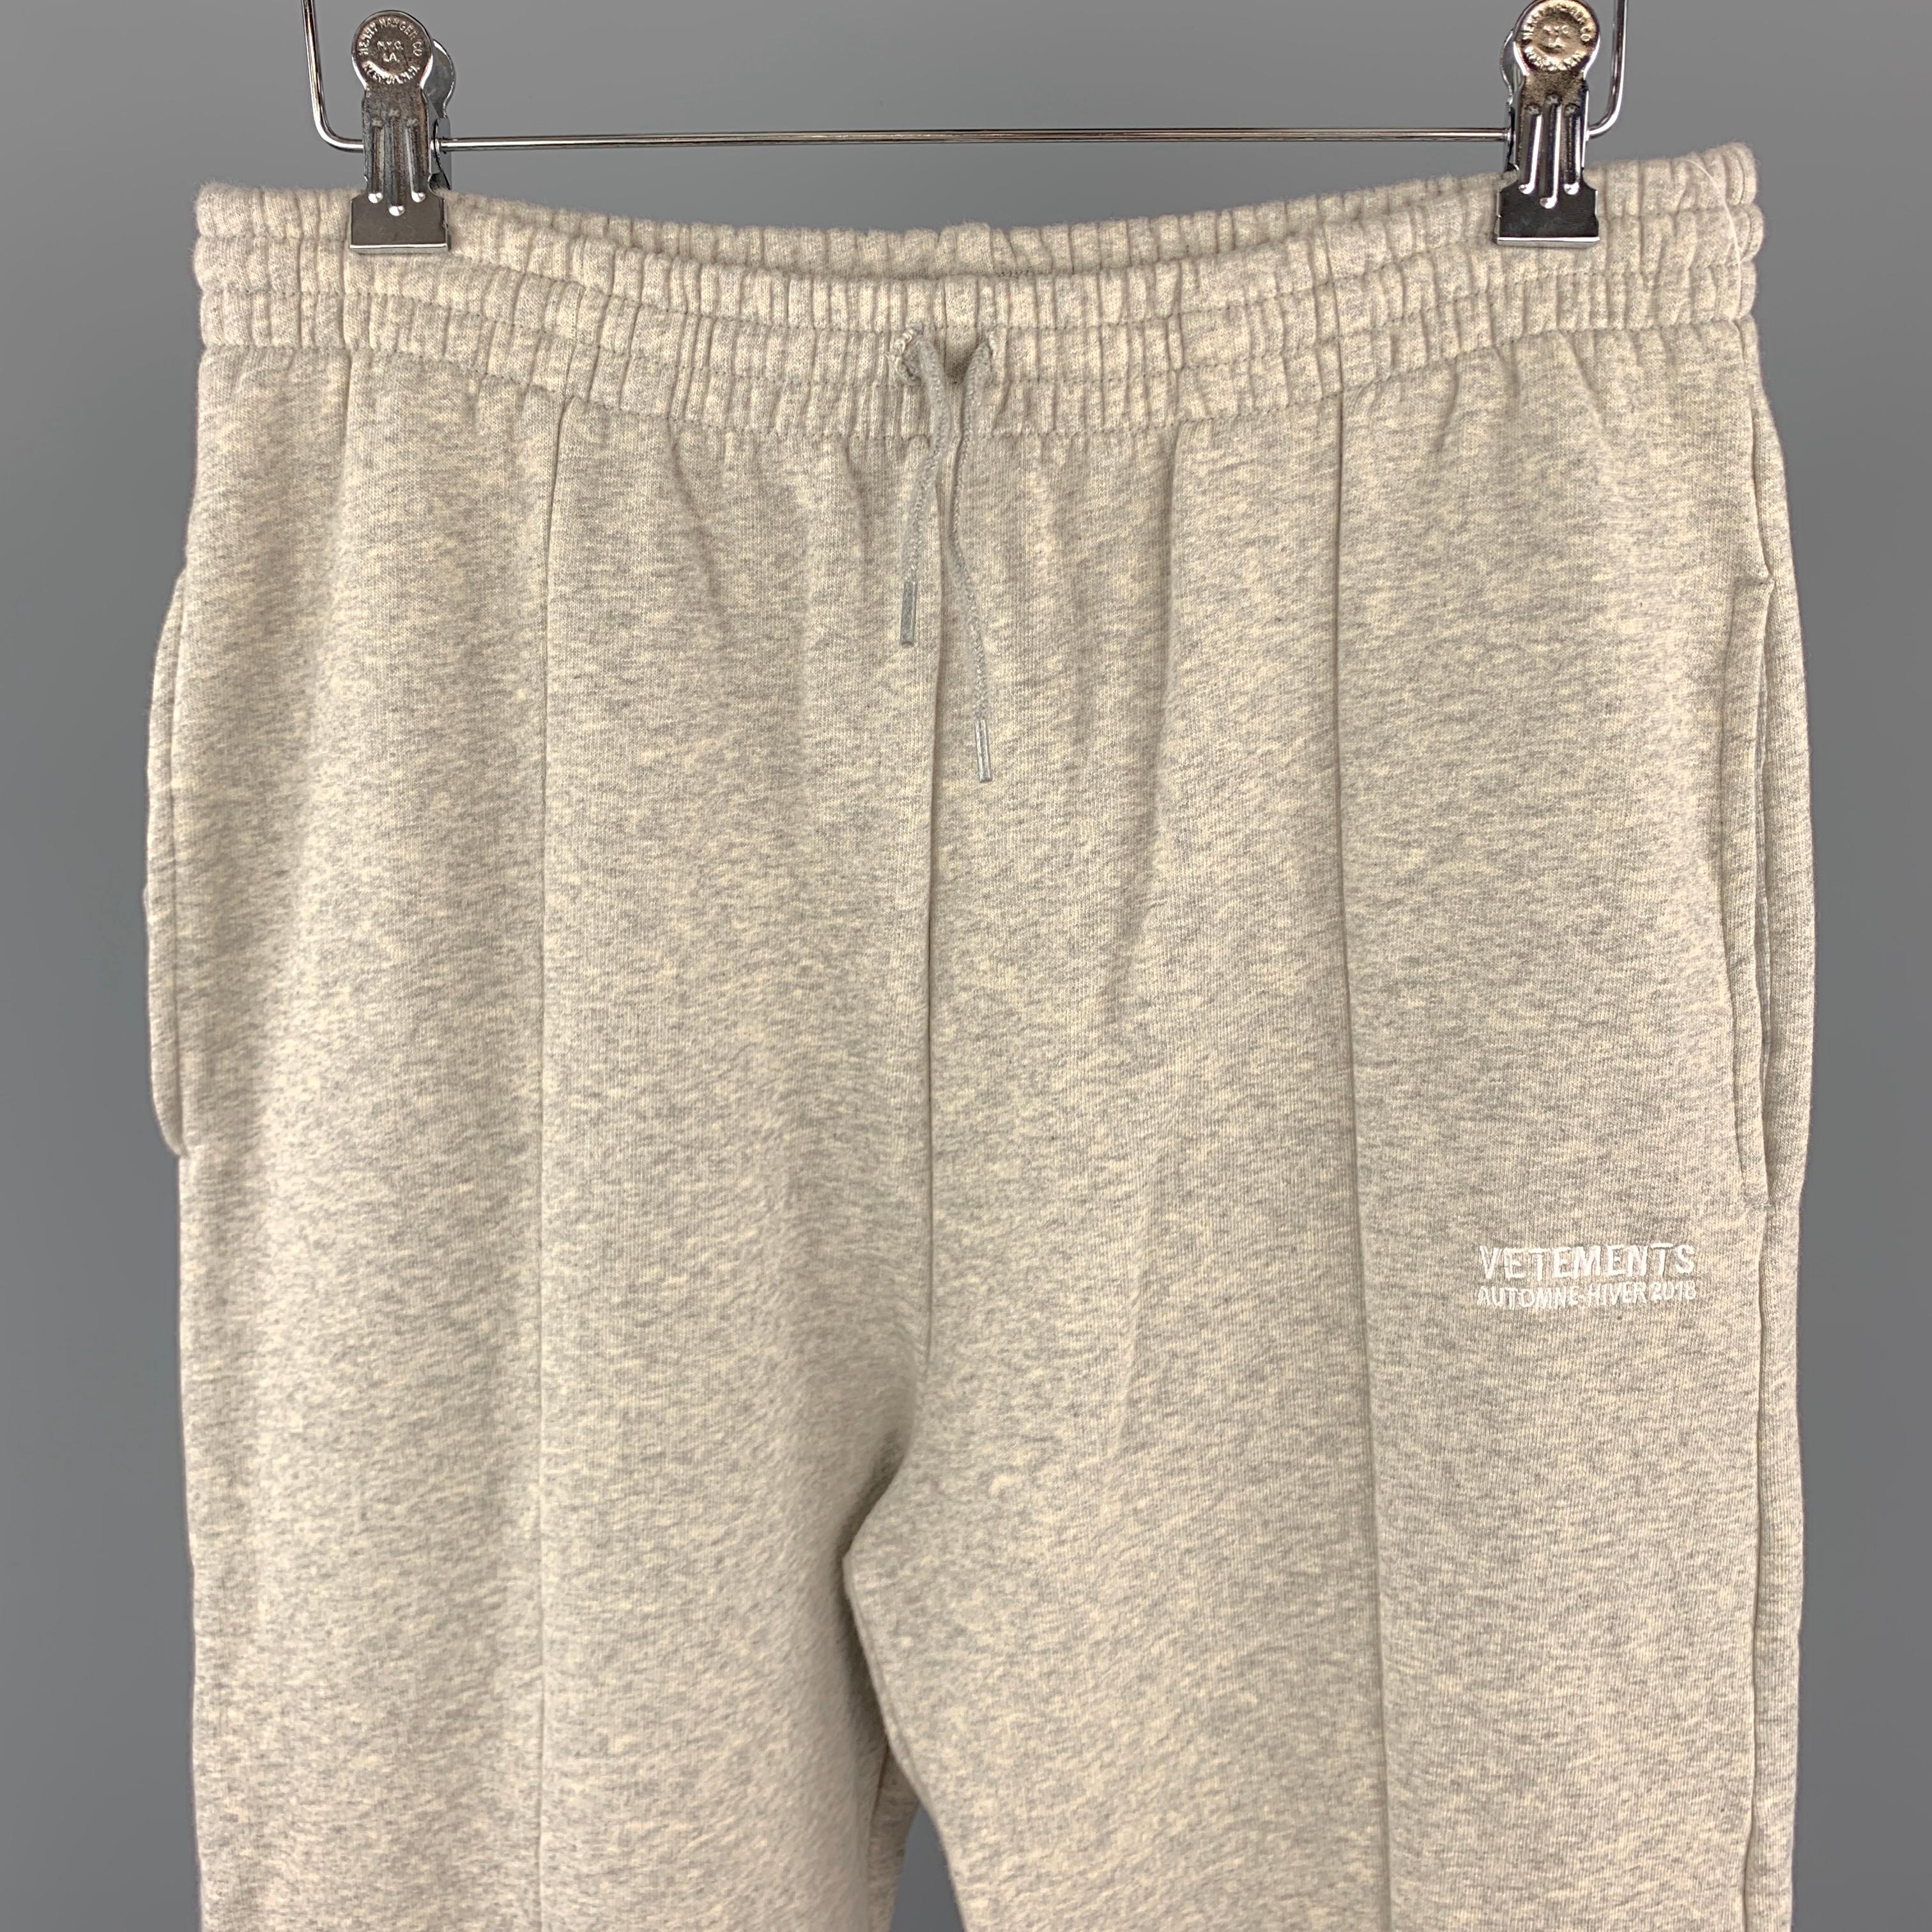 VETEMENTS Sweatpants comes in a light grey tone in a cotton / elastane material, with a drawstring, slit pockets, and detailed cuffs. Made in Portugal. 

New With tags.
Marked: L

Measurements:

Waist: 29 in. 
Rise: 13.5 in. 
Inseam: 30 in. 